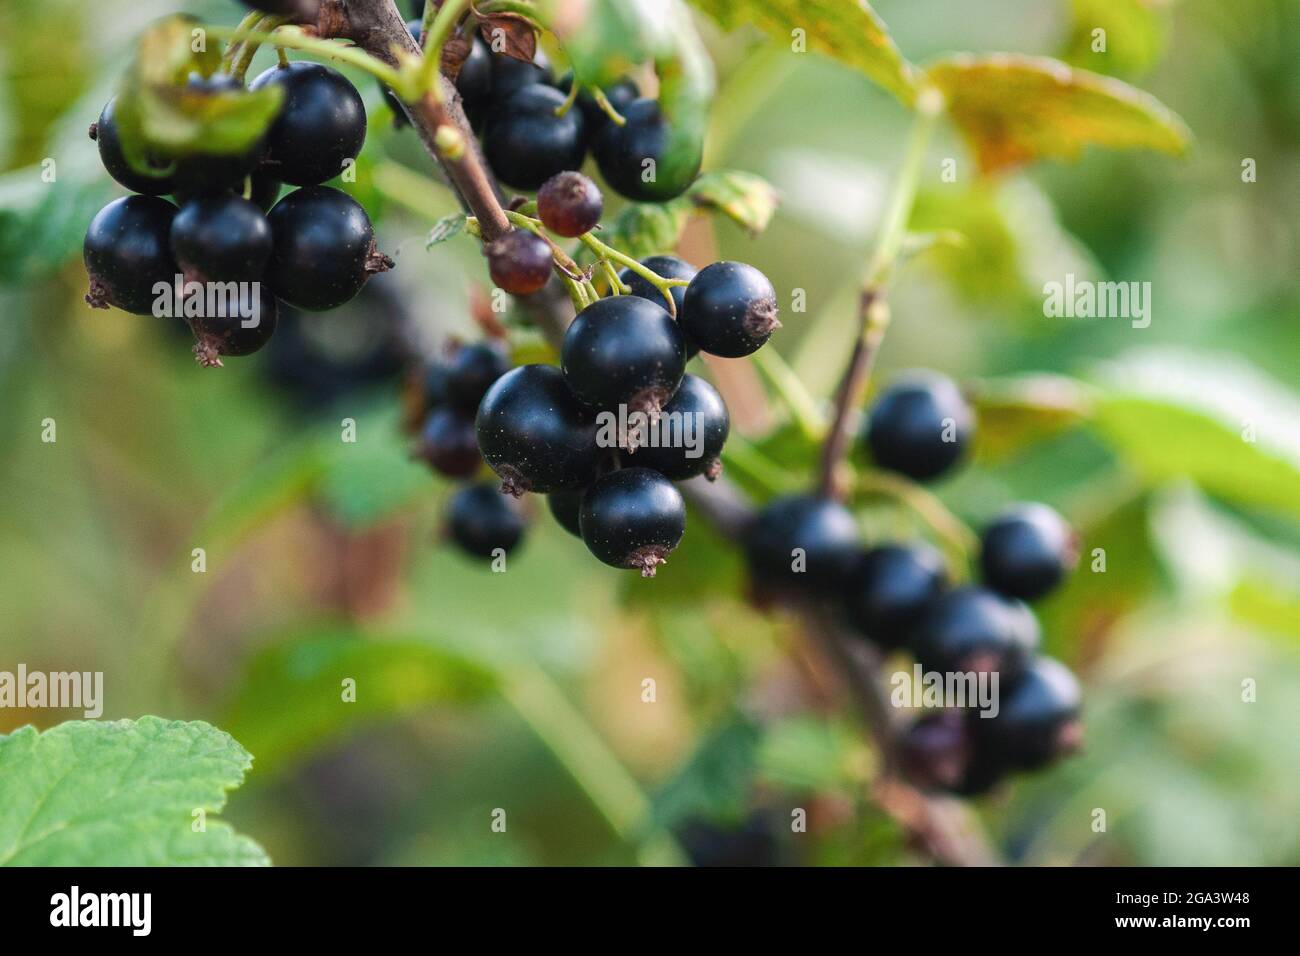 Black currant ripe berries growing on the bush Stock Photo